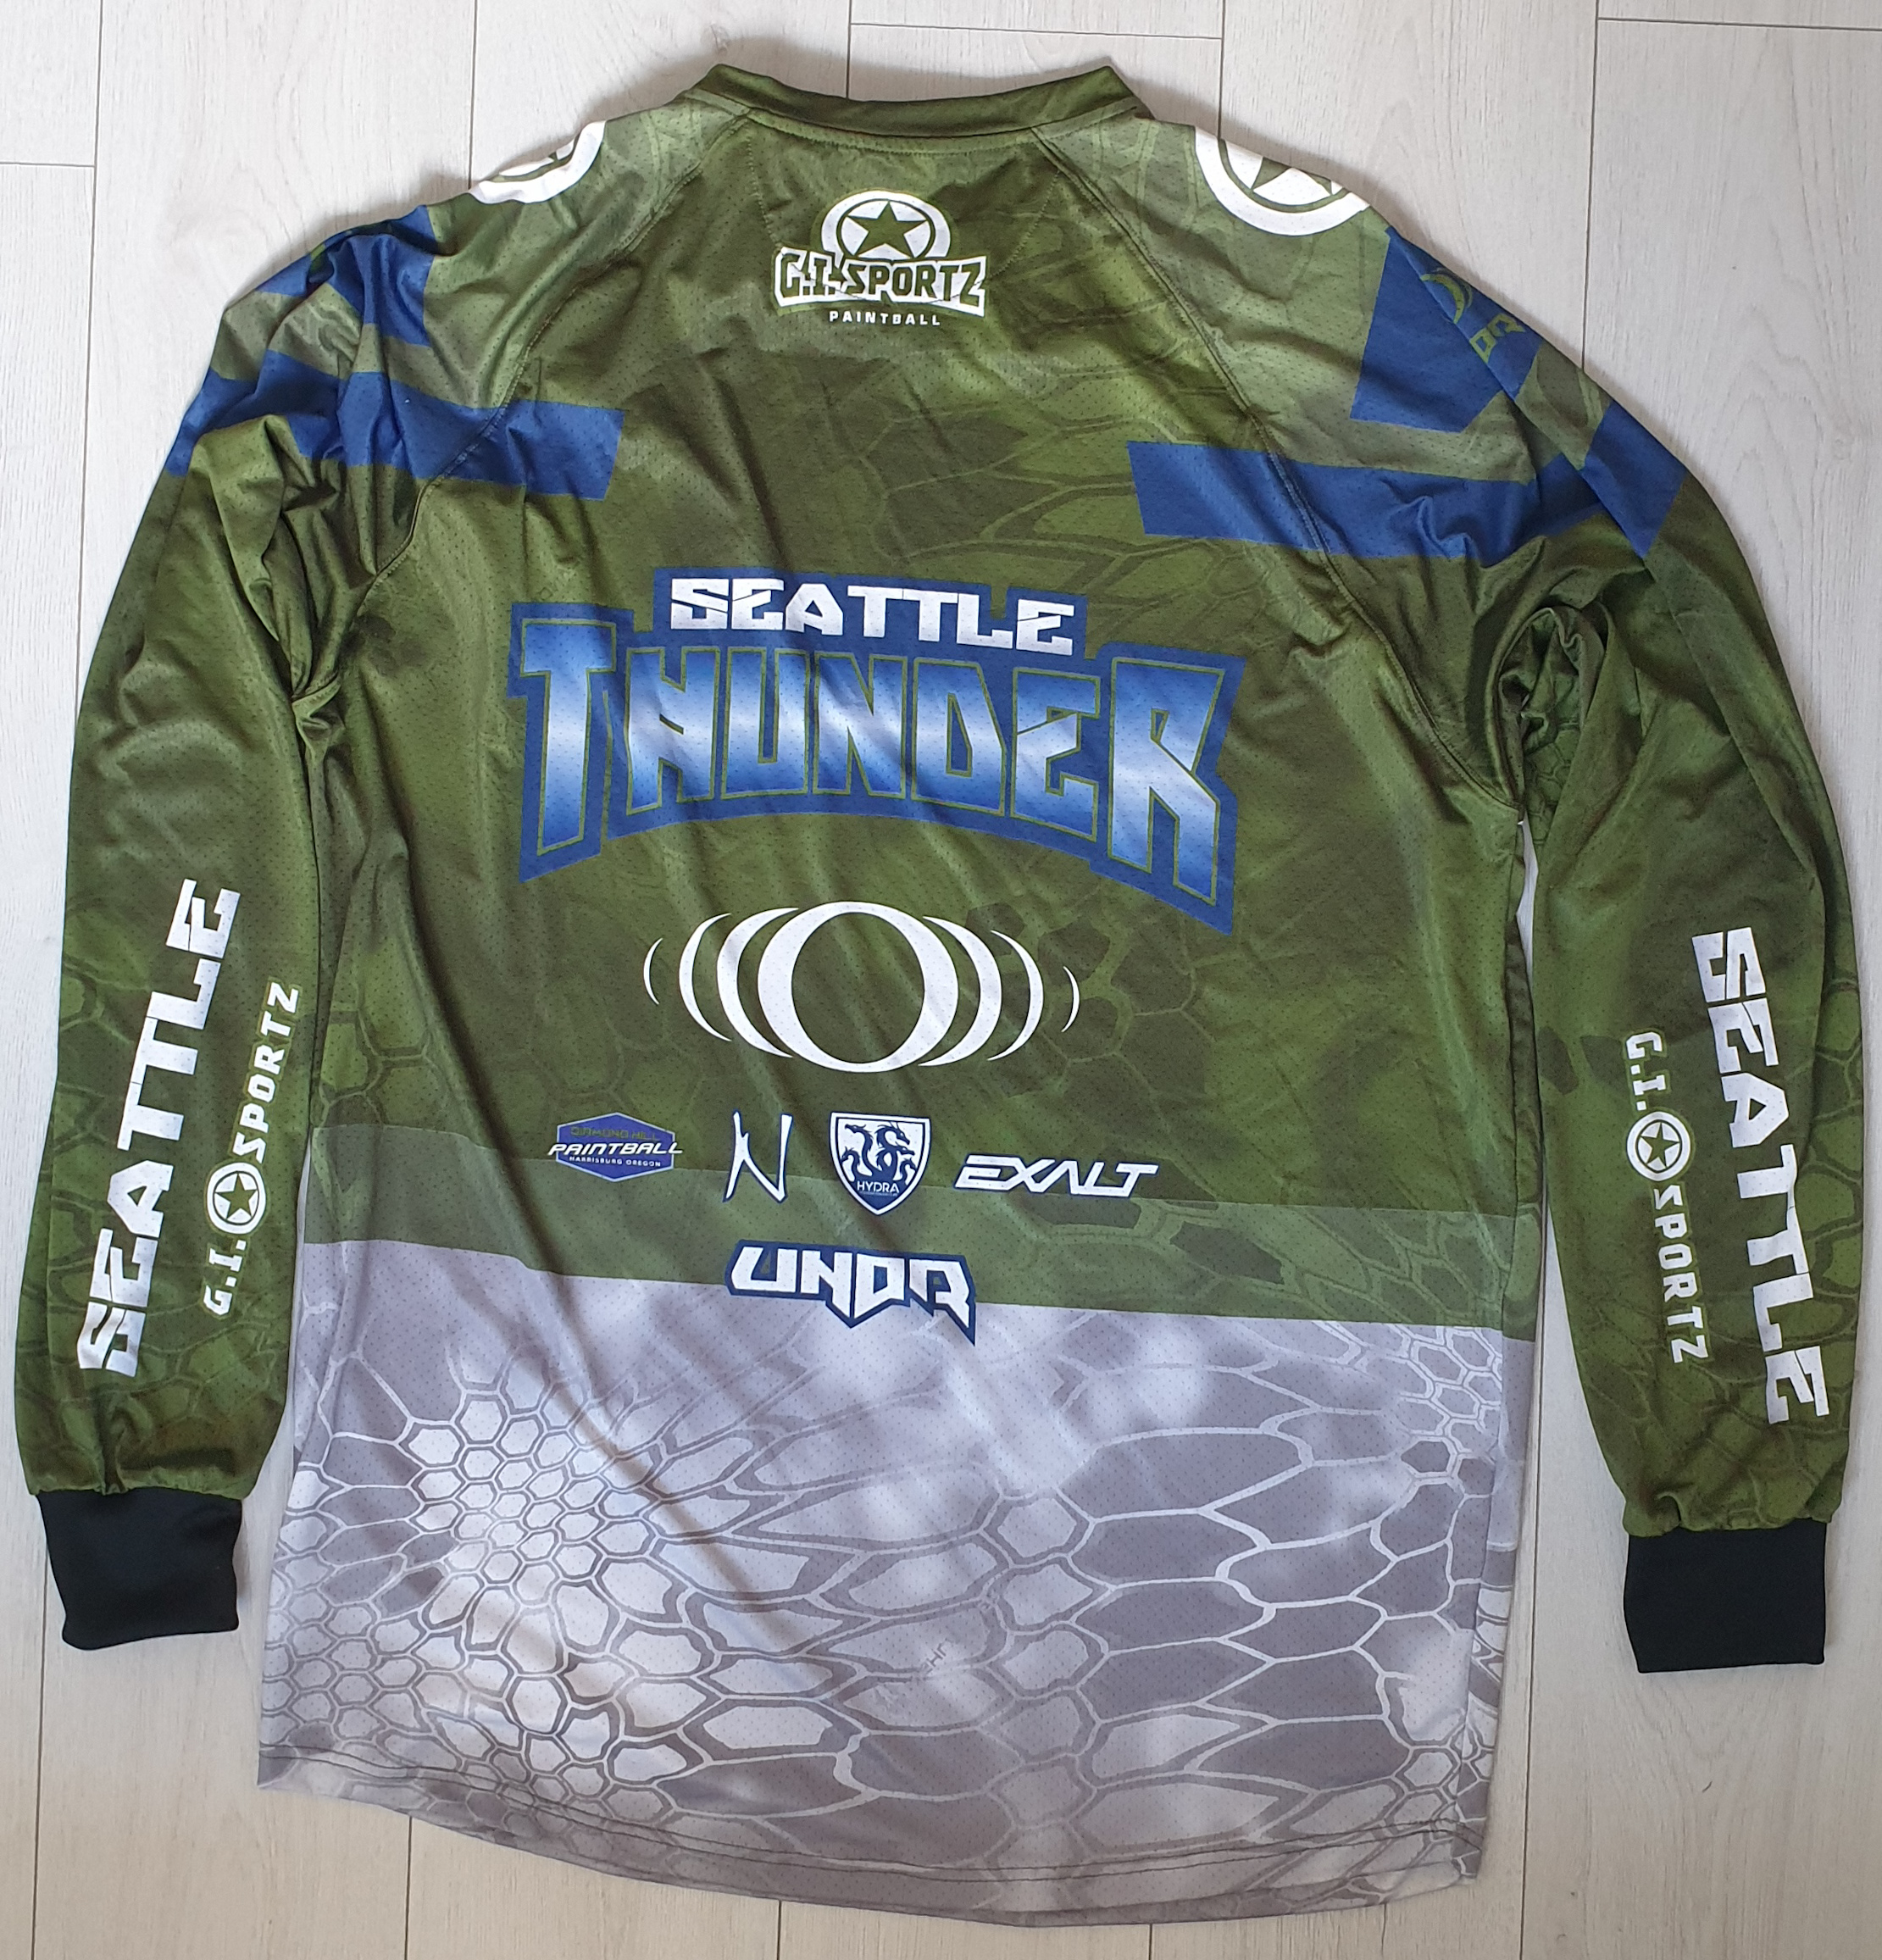 Seattle Thunder Jersey 3XL - USED